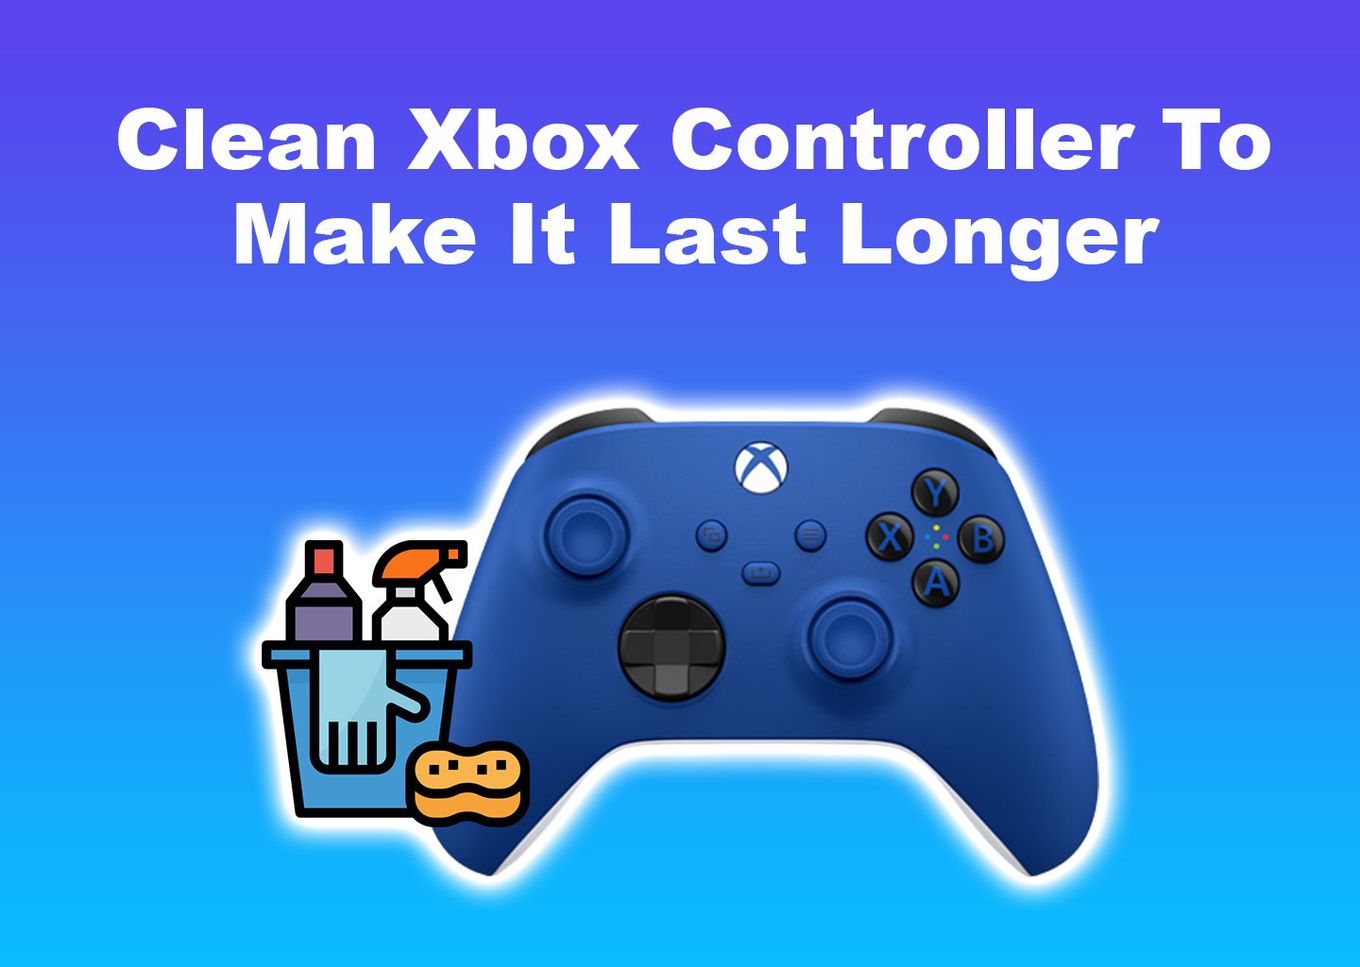 Clean Xbox Controller To Make It Last Longer